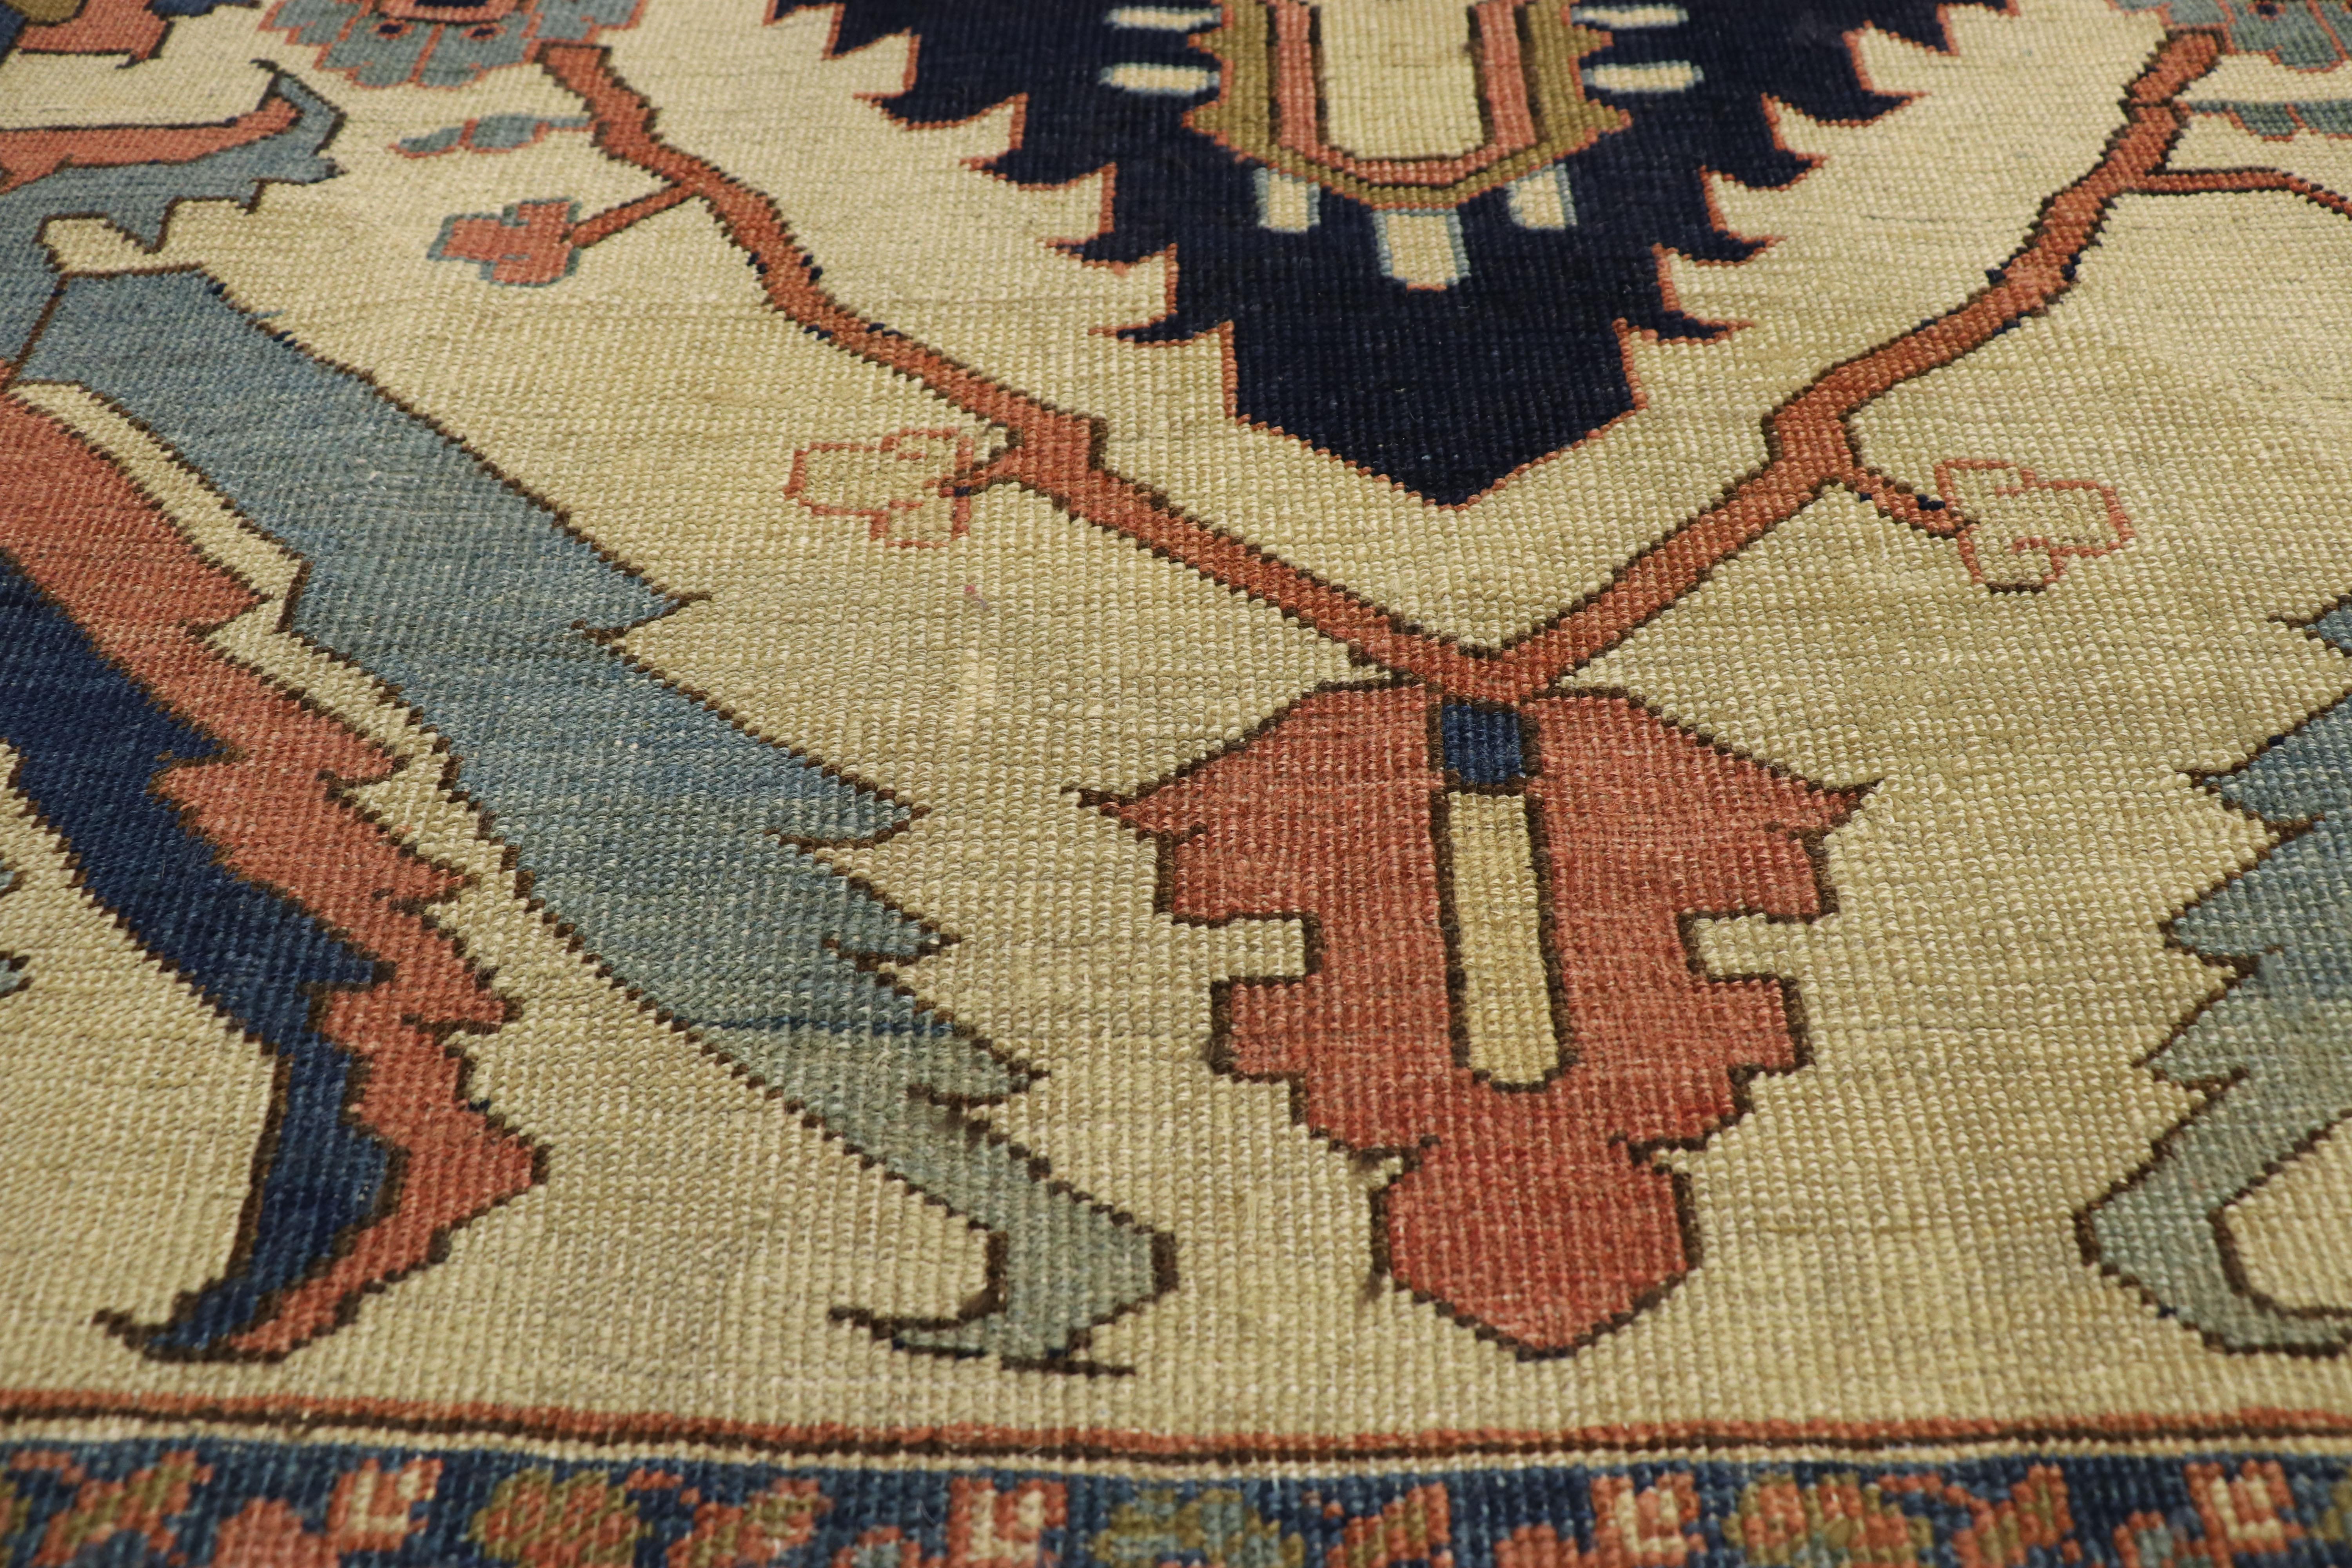 1880s Antique Persian Serapi Rug, Timeless Elegance Meets Relaxed Refinement In Good Condition For Sale In Dallas, TX